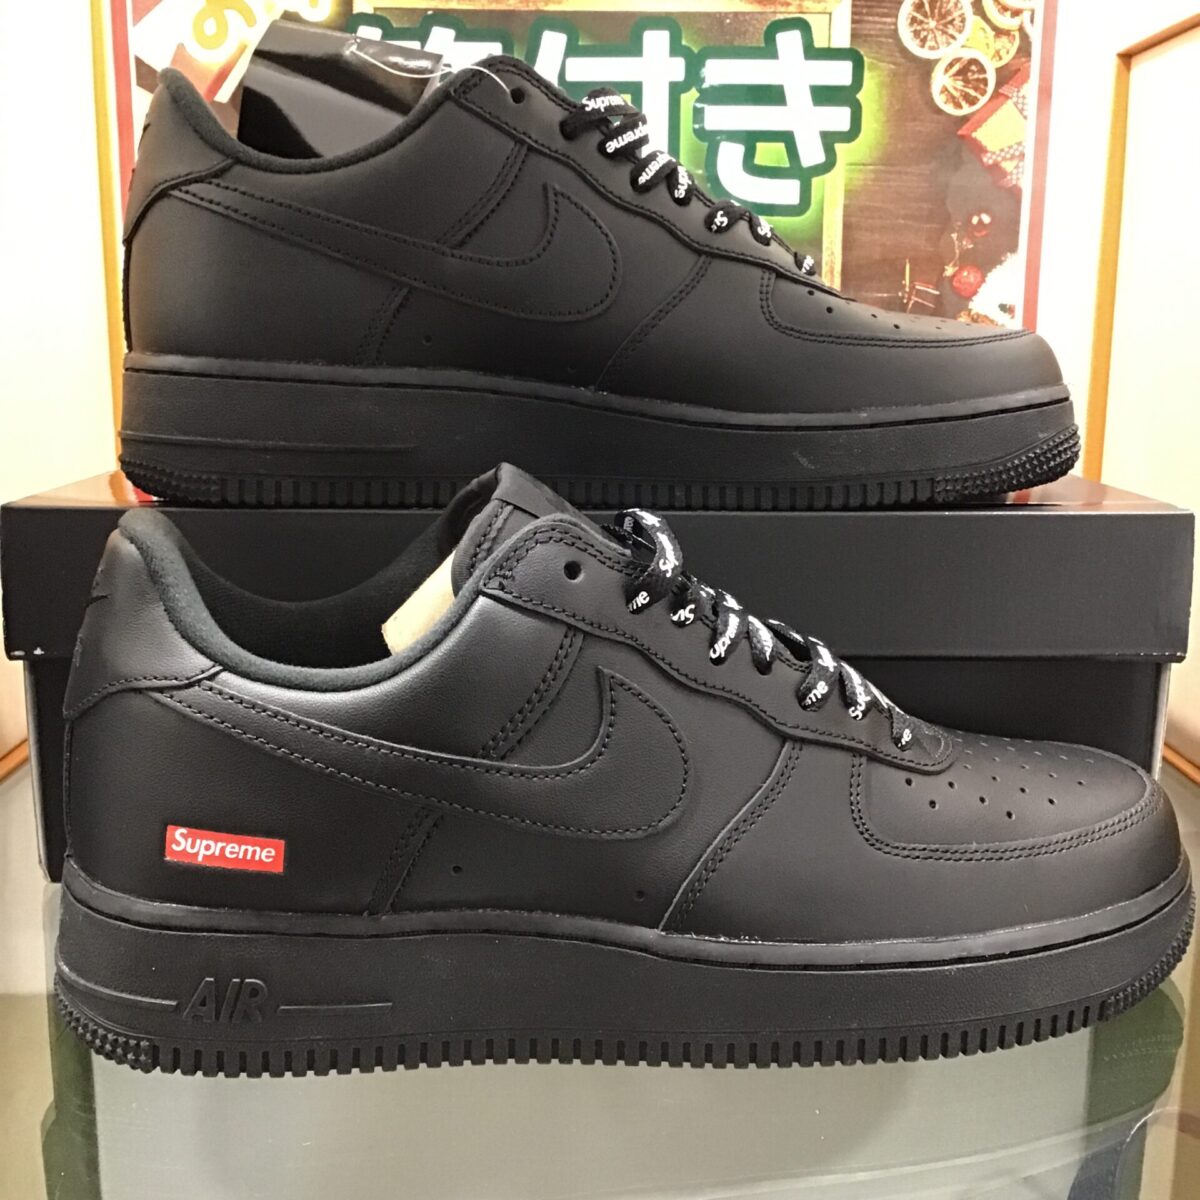 NIKE×SUPREME Air Force 1 Low Black】の買取価格と査定ポイント